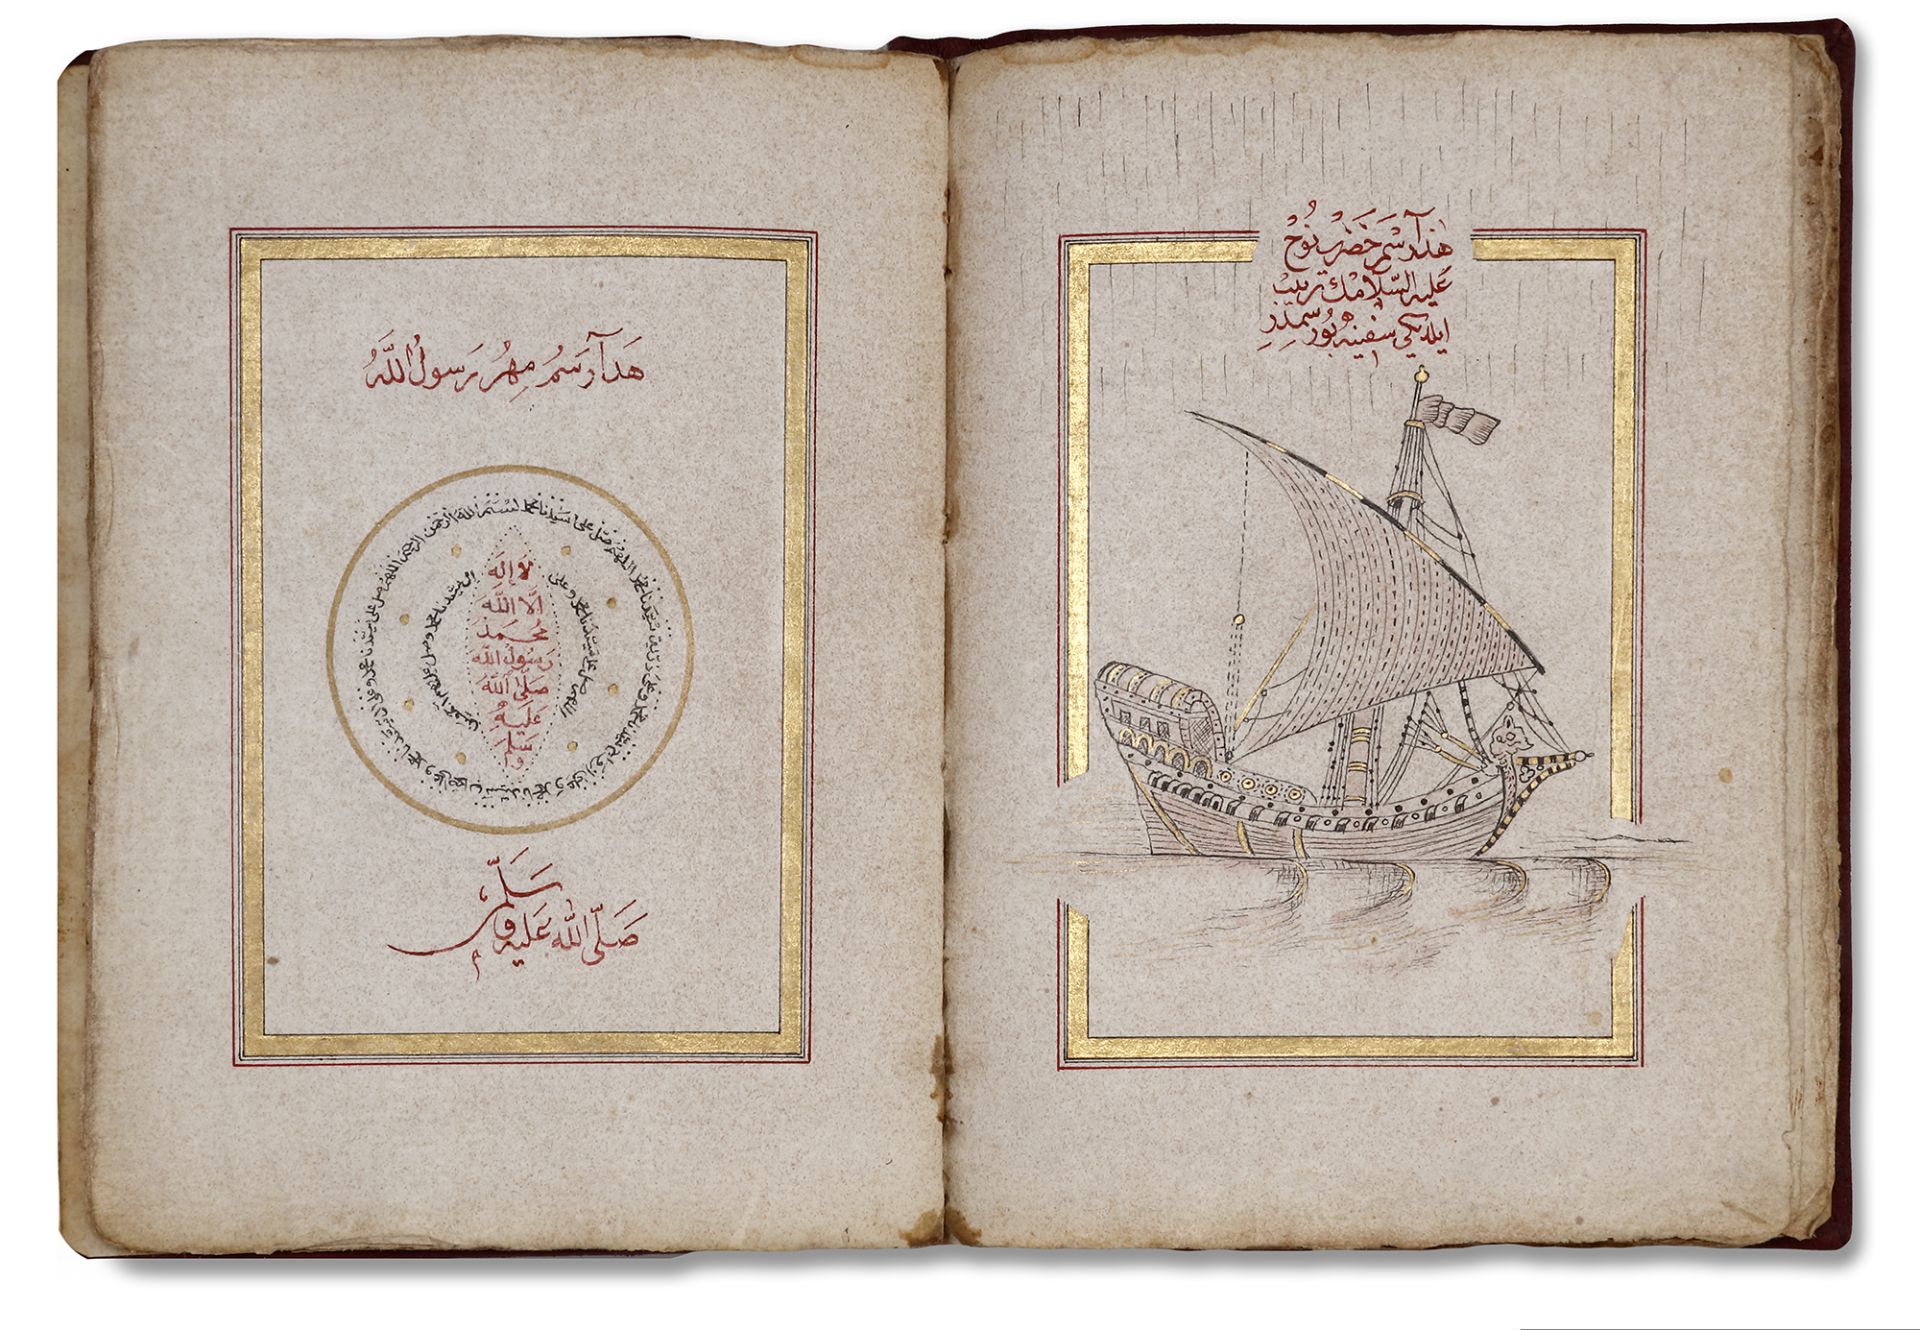 AN OTTOMAN COMPILATION OF PRAYERS AND HOLY PLACES BY ABD AL-QADIR HUSRI, OTTOMAN TURKEY, DATED 1181 - Image 8 of 12